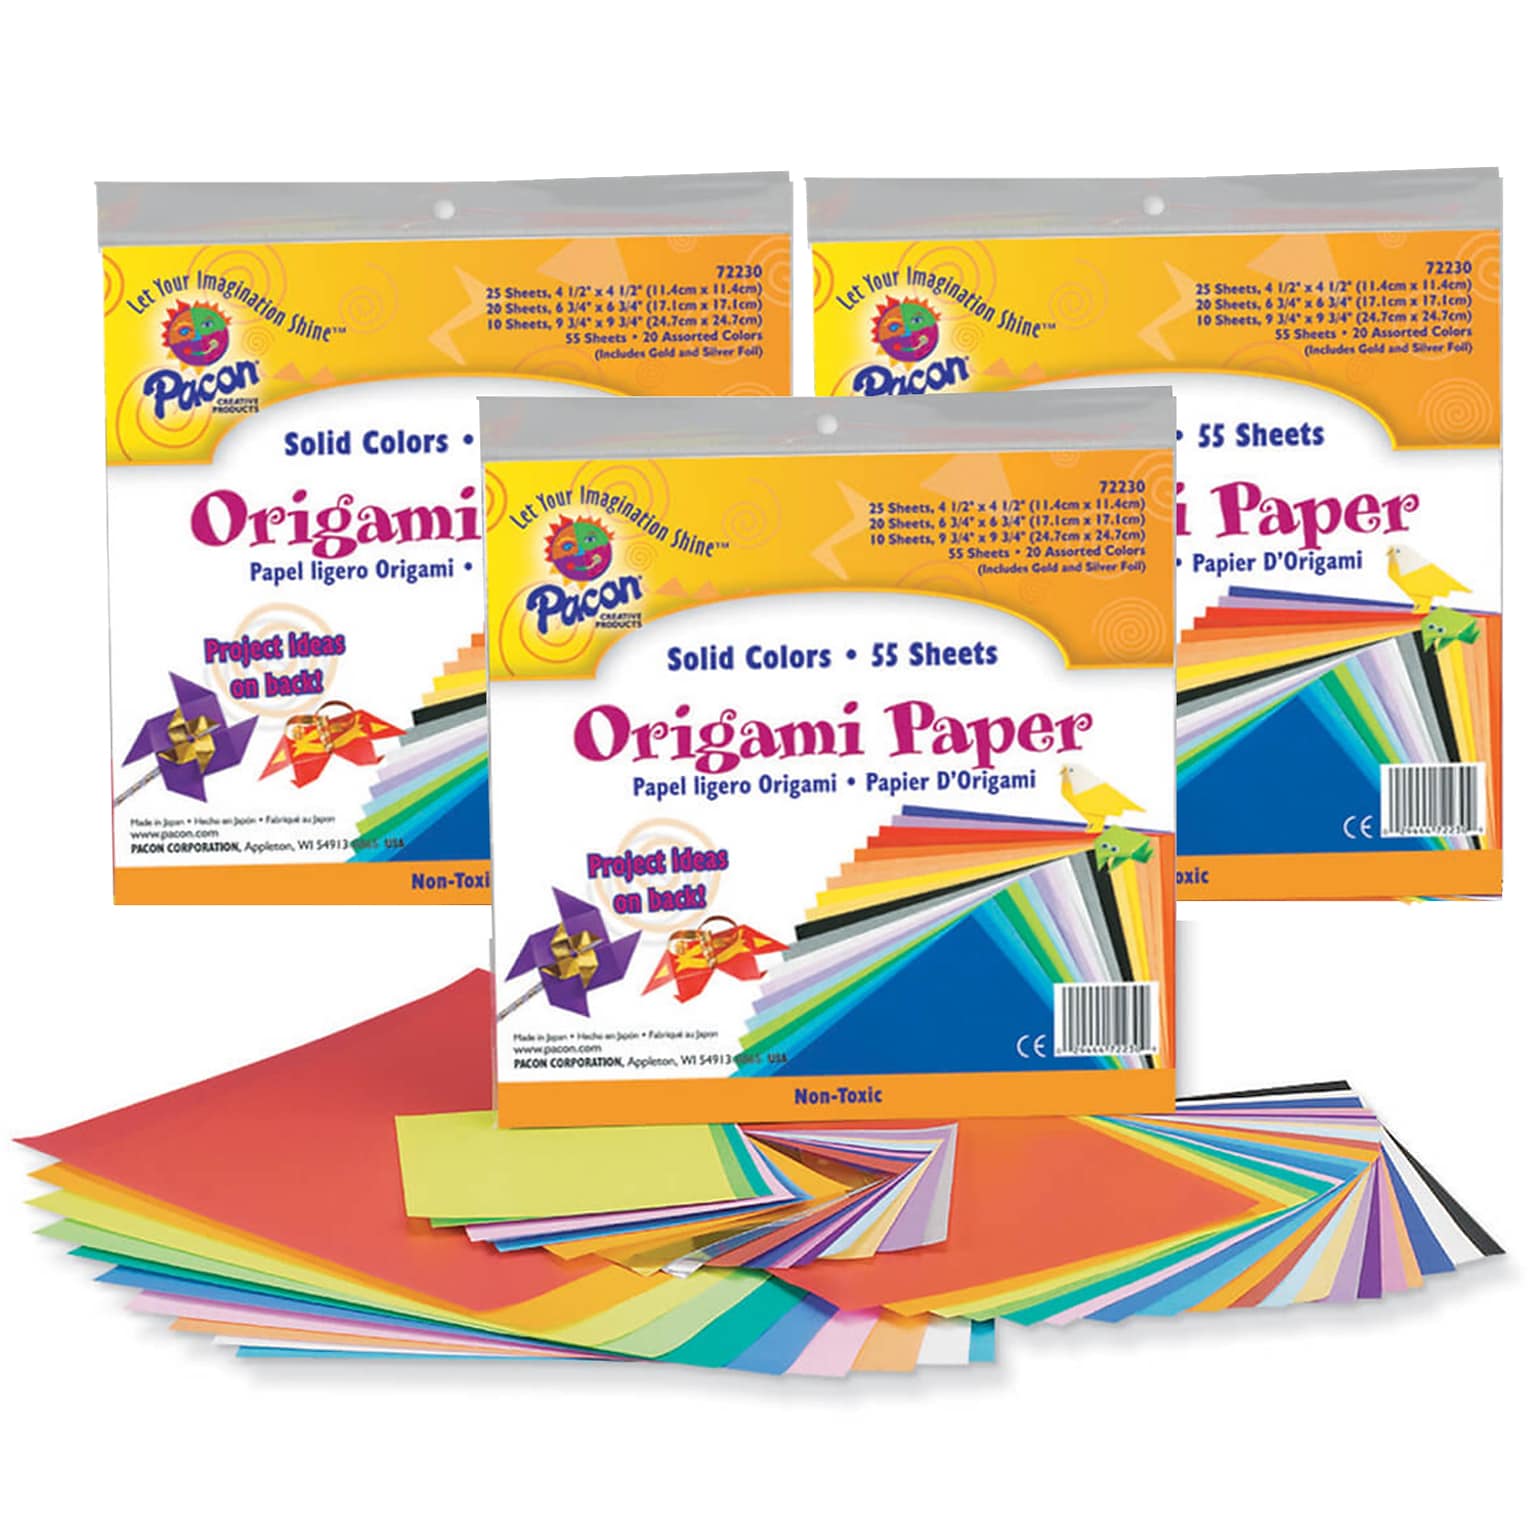 Creativity Street® Origami Paper, Sizes Up To 9.75 x 9.75, Assorted Colors, 55 Sheets Per Pack, 3 Packs (PAC72230-3)